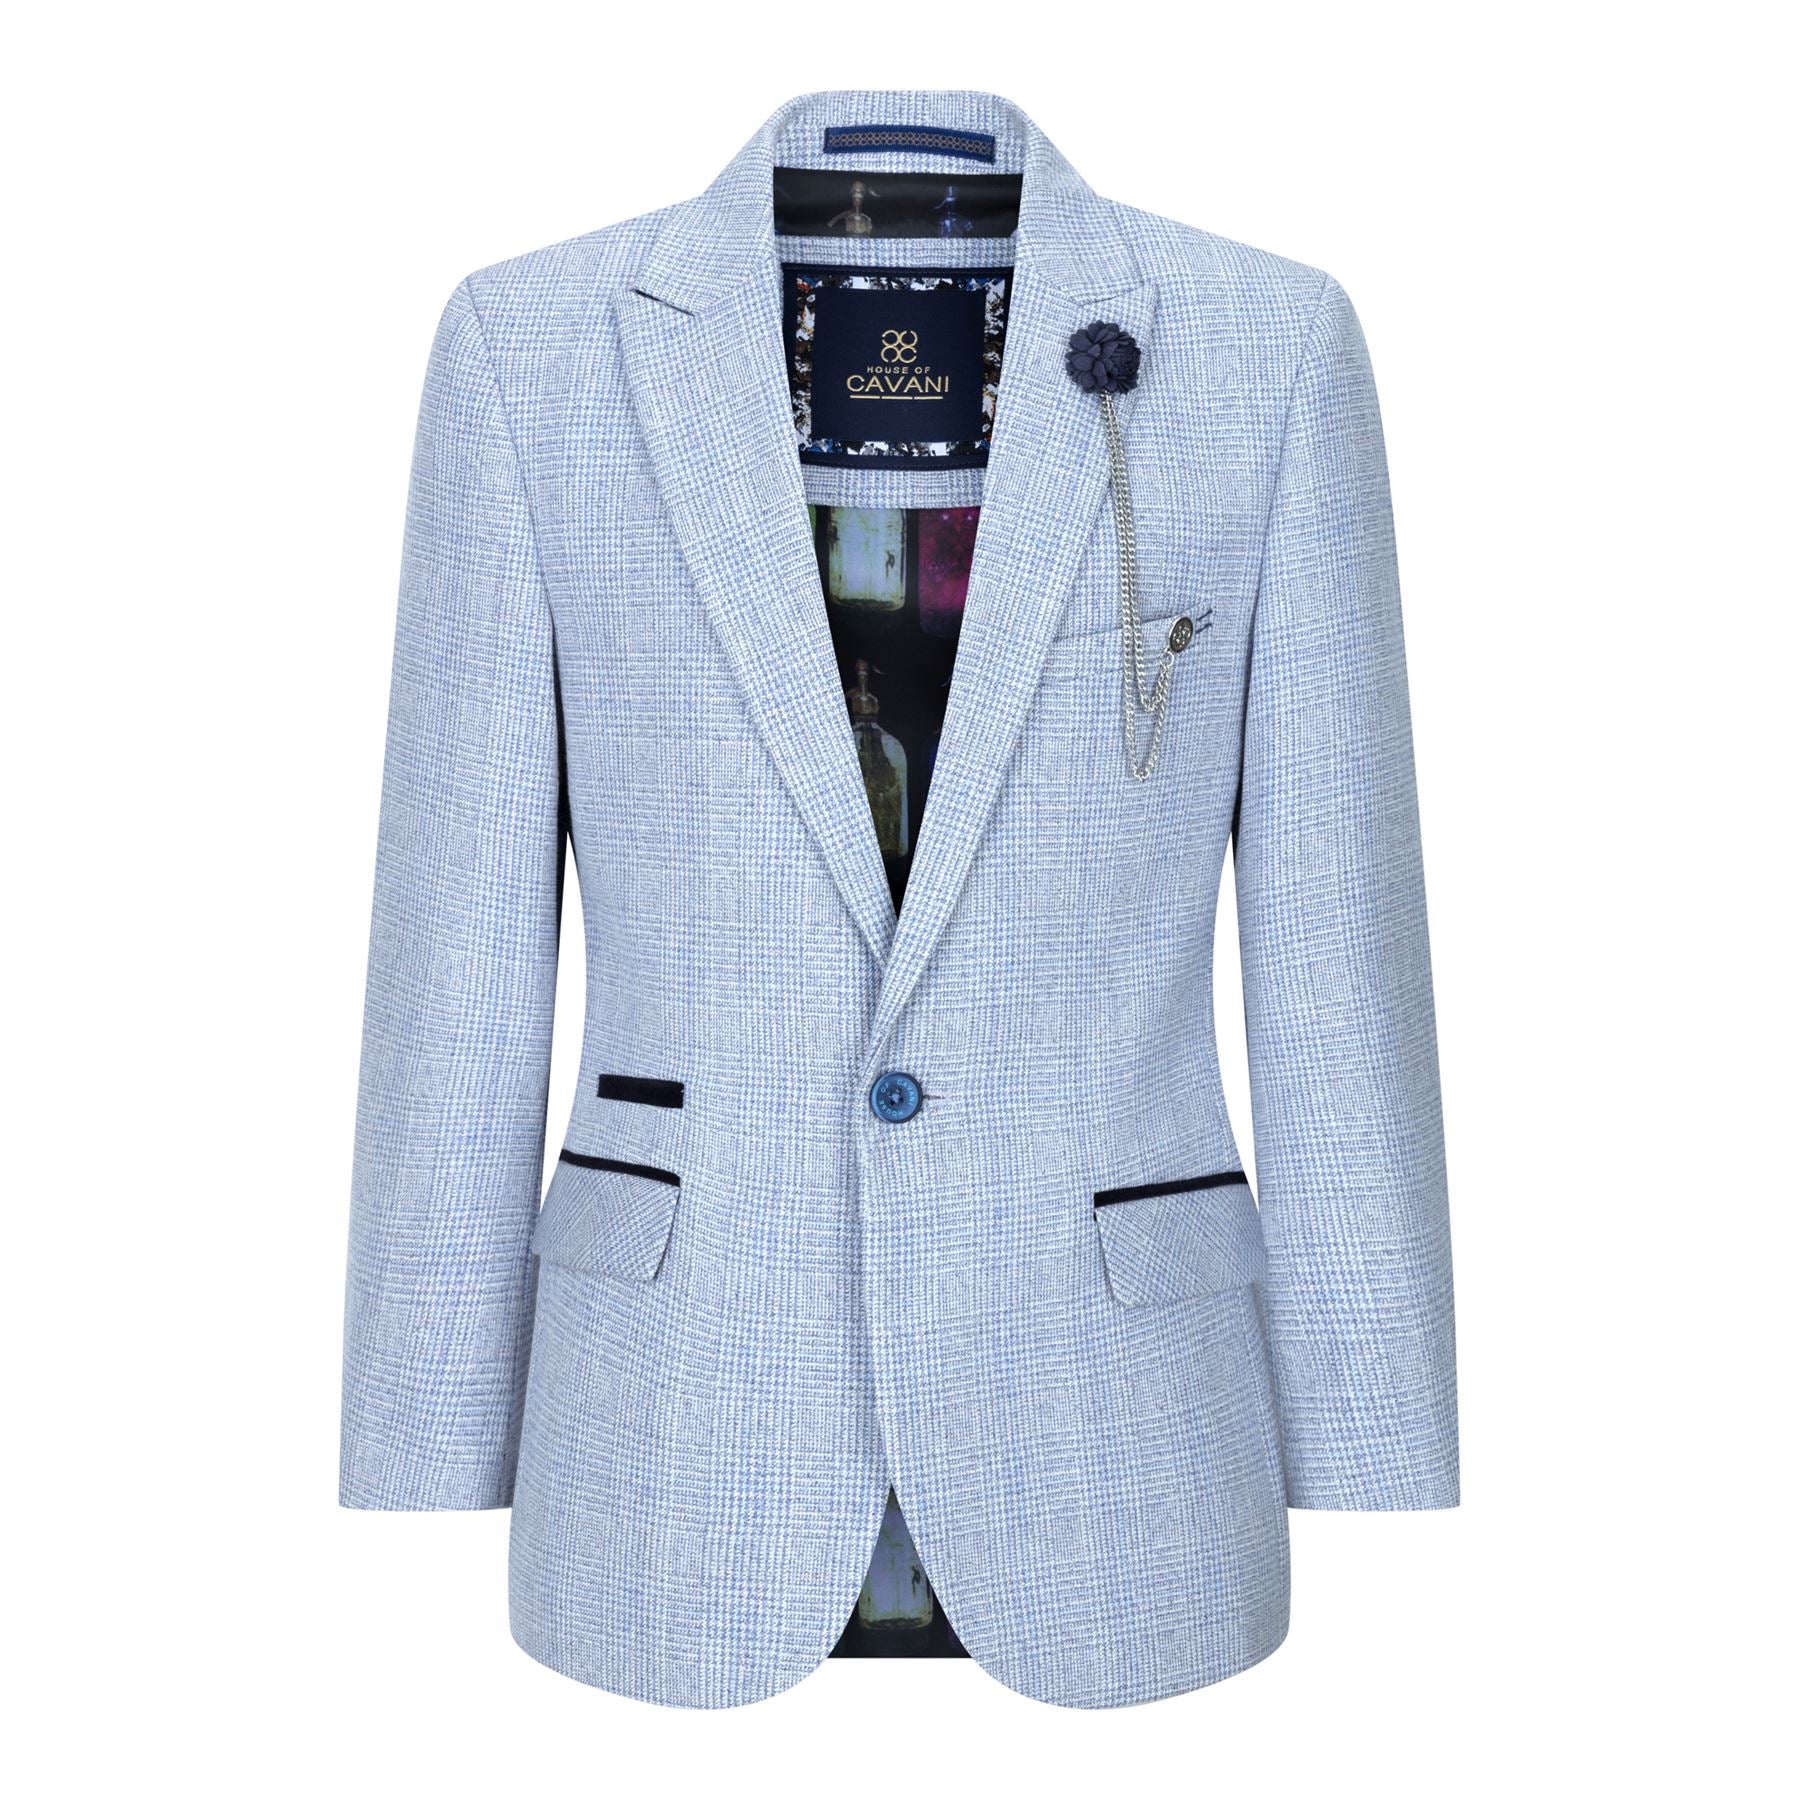 Boys 3 Piece Check Suit Tweed Light Blue Tailored Fit Wedding Peaky ...